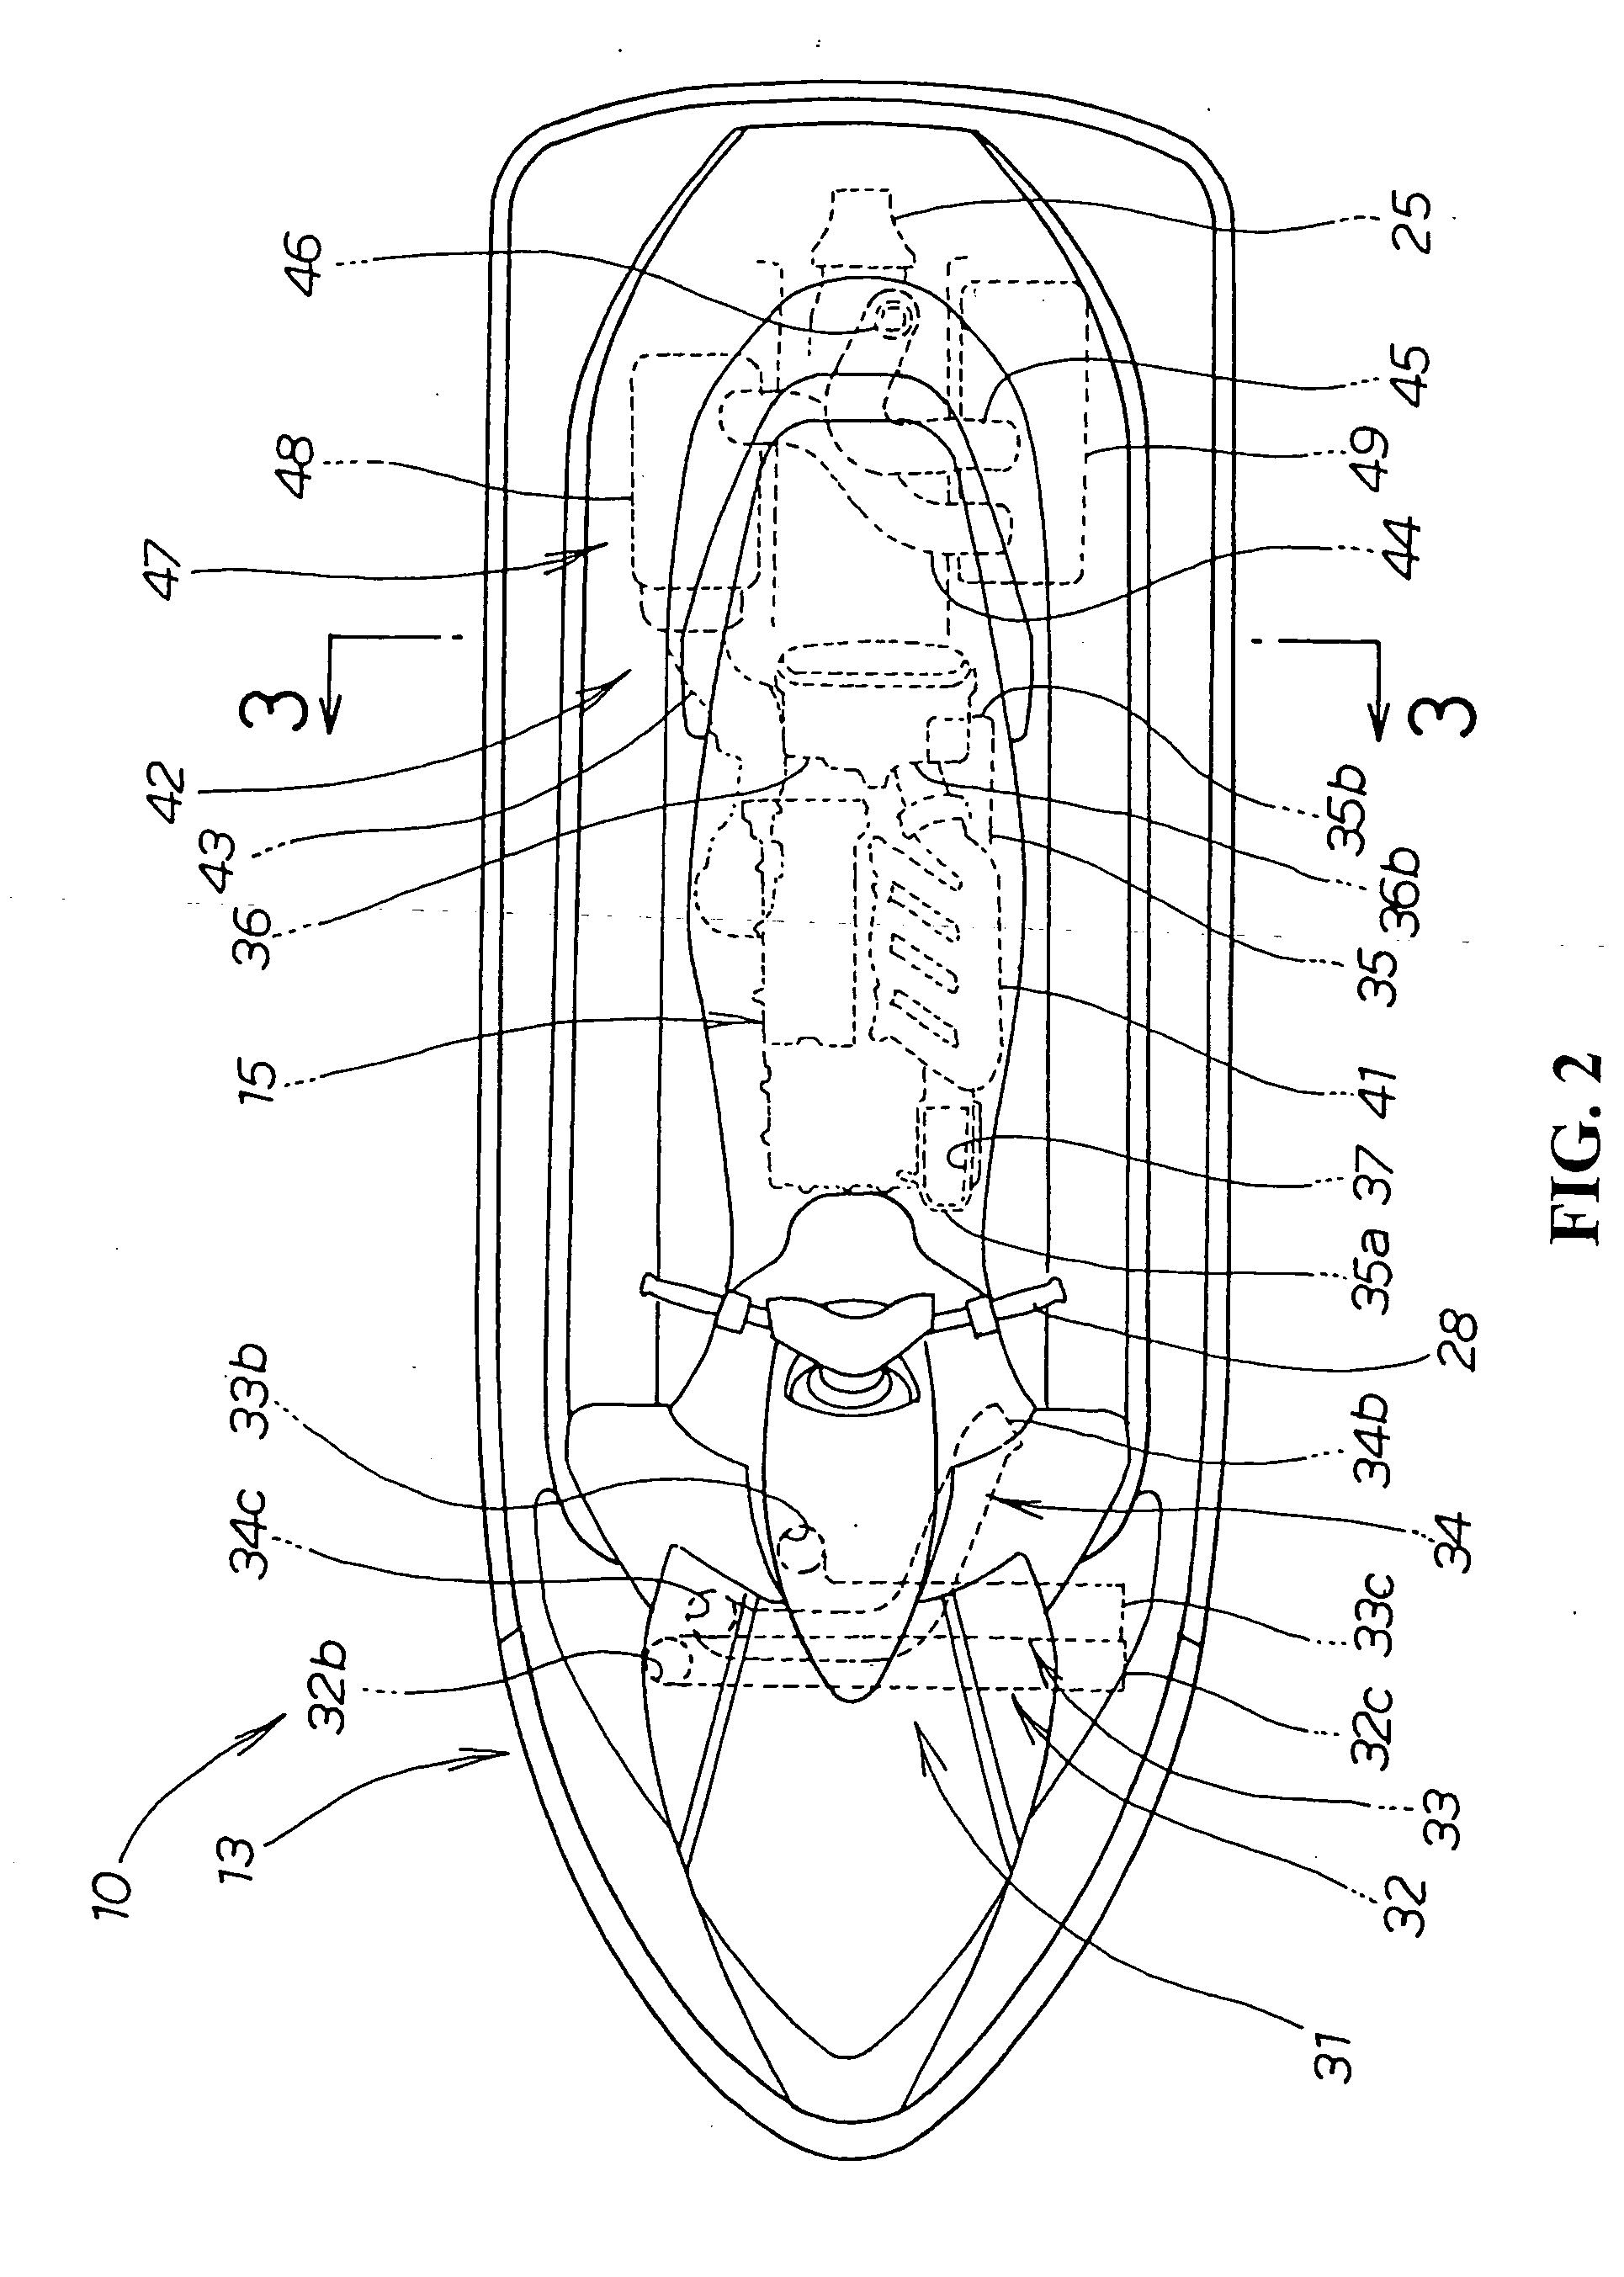 Air intake device for watercraft